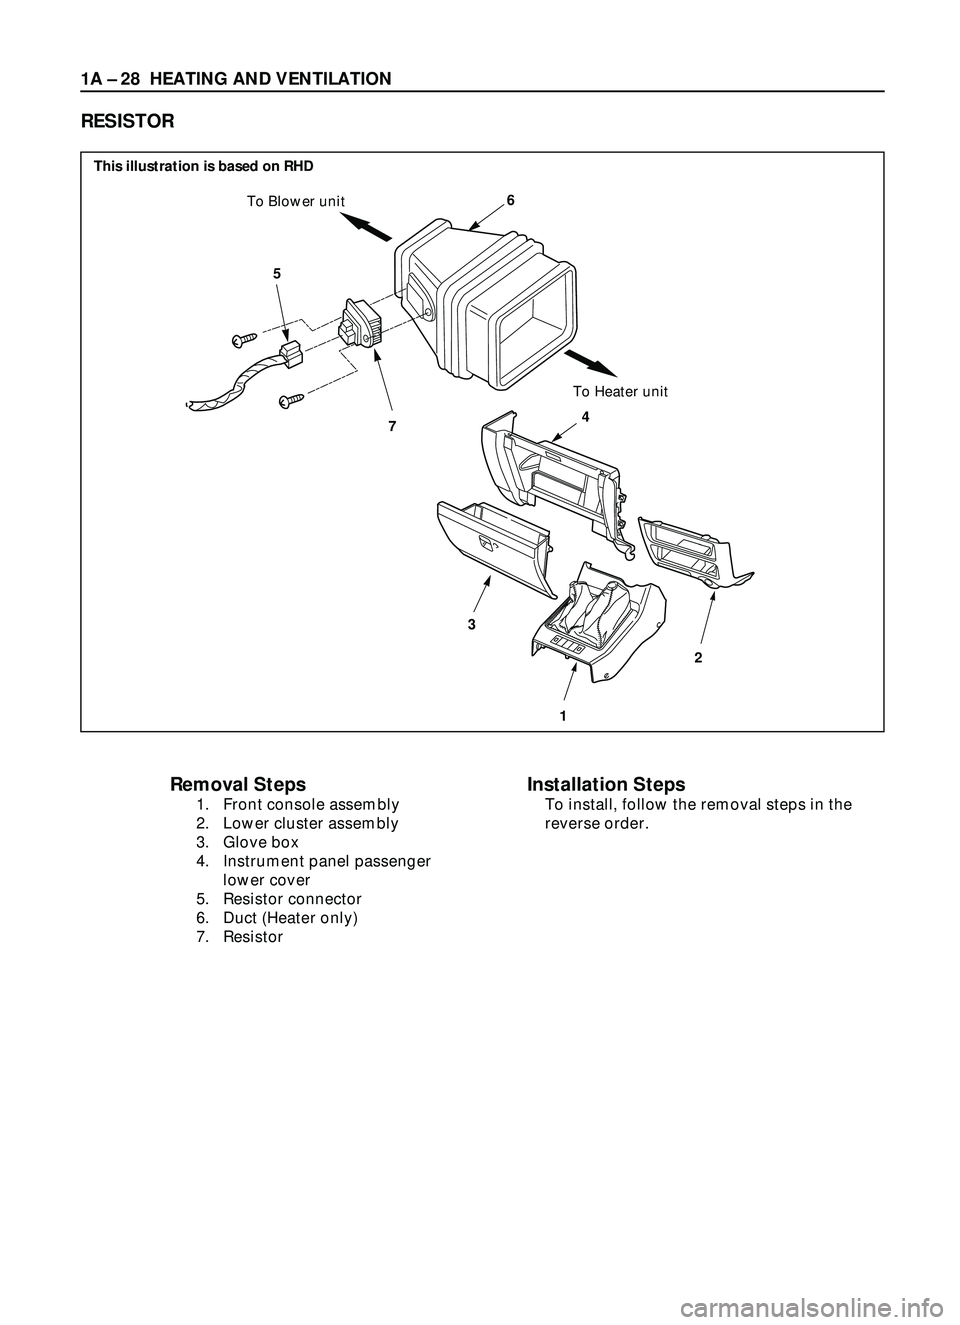 ISUZU TROOPER 1998  Service Repair Manual 1A Ð 28 HEATING AND VENTILATION
5
7
6To Blower unit
To Heater unit
34
12
Removal Steps
1. Front console assembly
2. Lower cluster assembly
3. Glove box
4. Instrument panel passenger
lower cover
5. Re